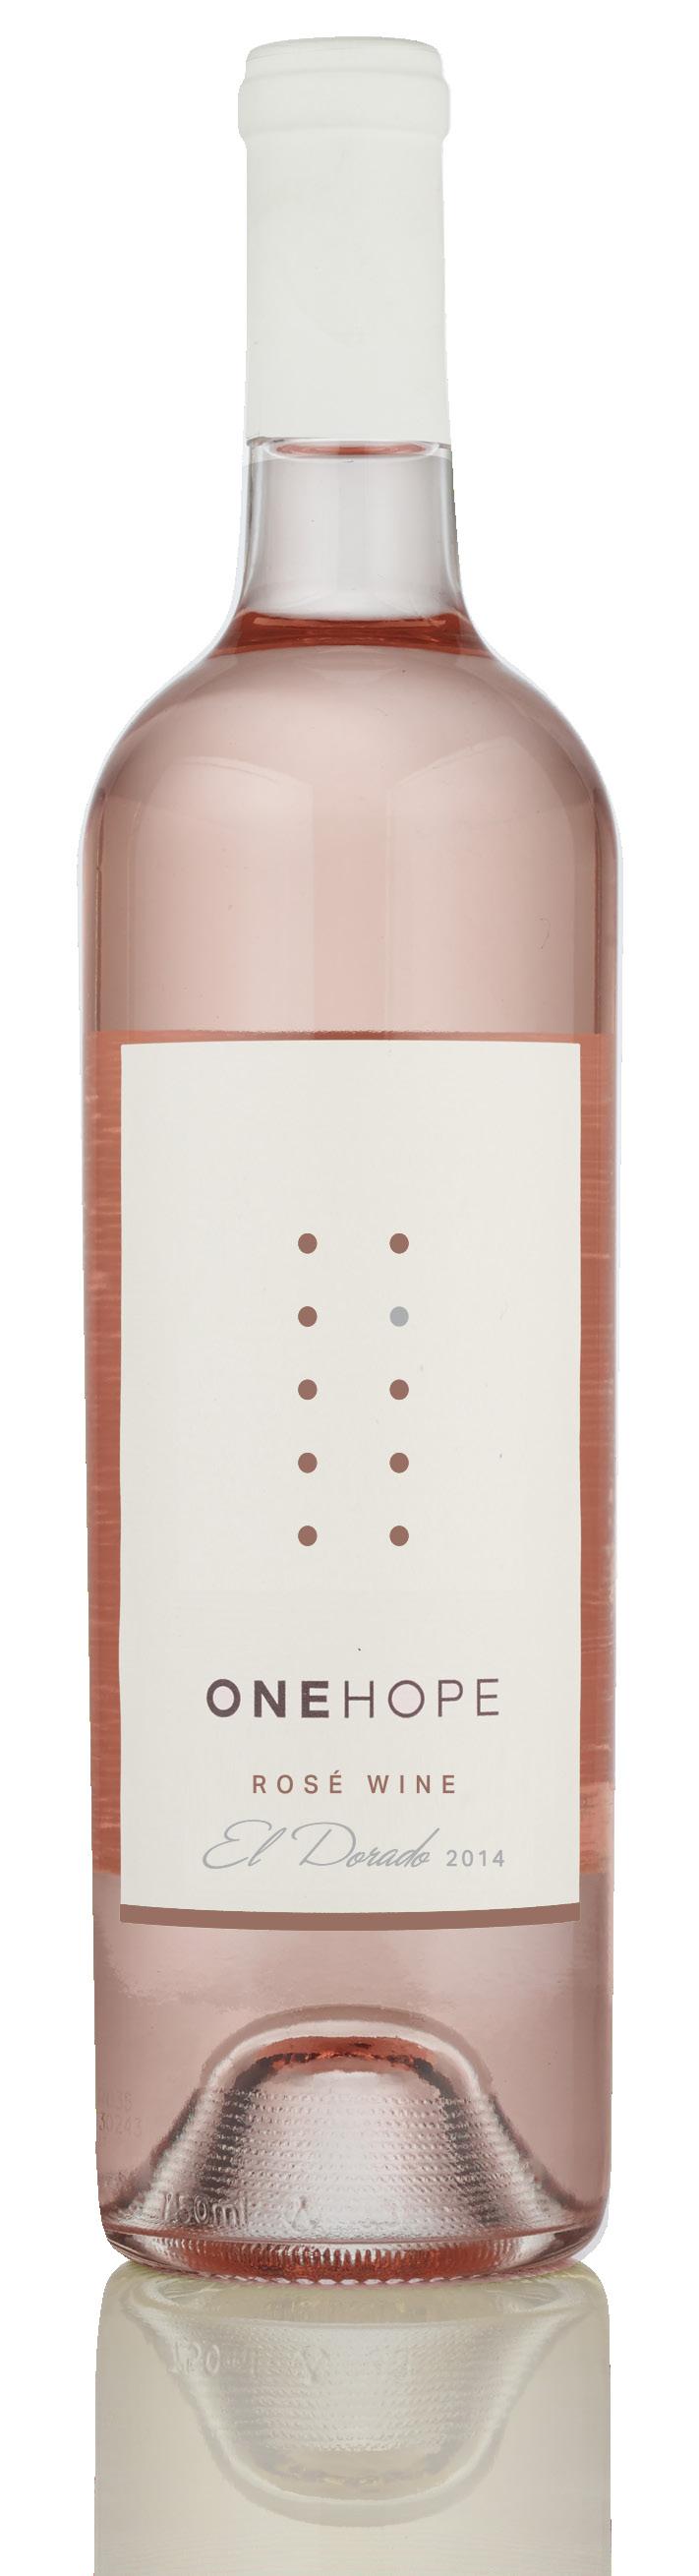 ONEHOPE ROSÉ juniper strawberry cinnamon watermelon Aromas of strawberries, juniper, pine resin and cinnamon. Flavors of summer melon with bright acidity.